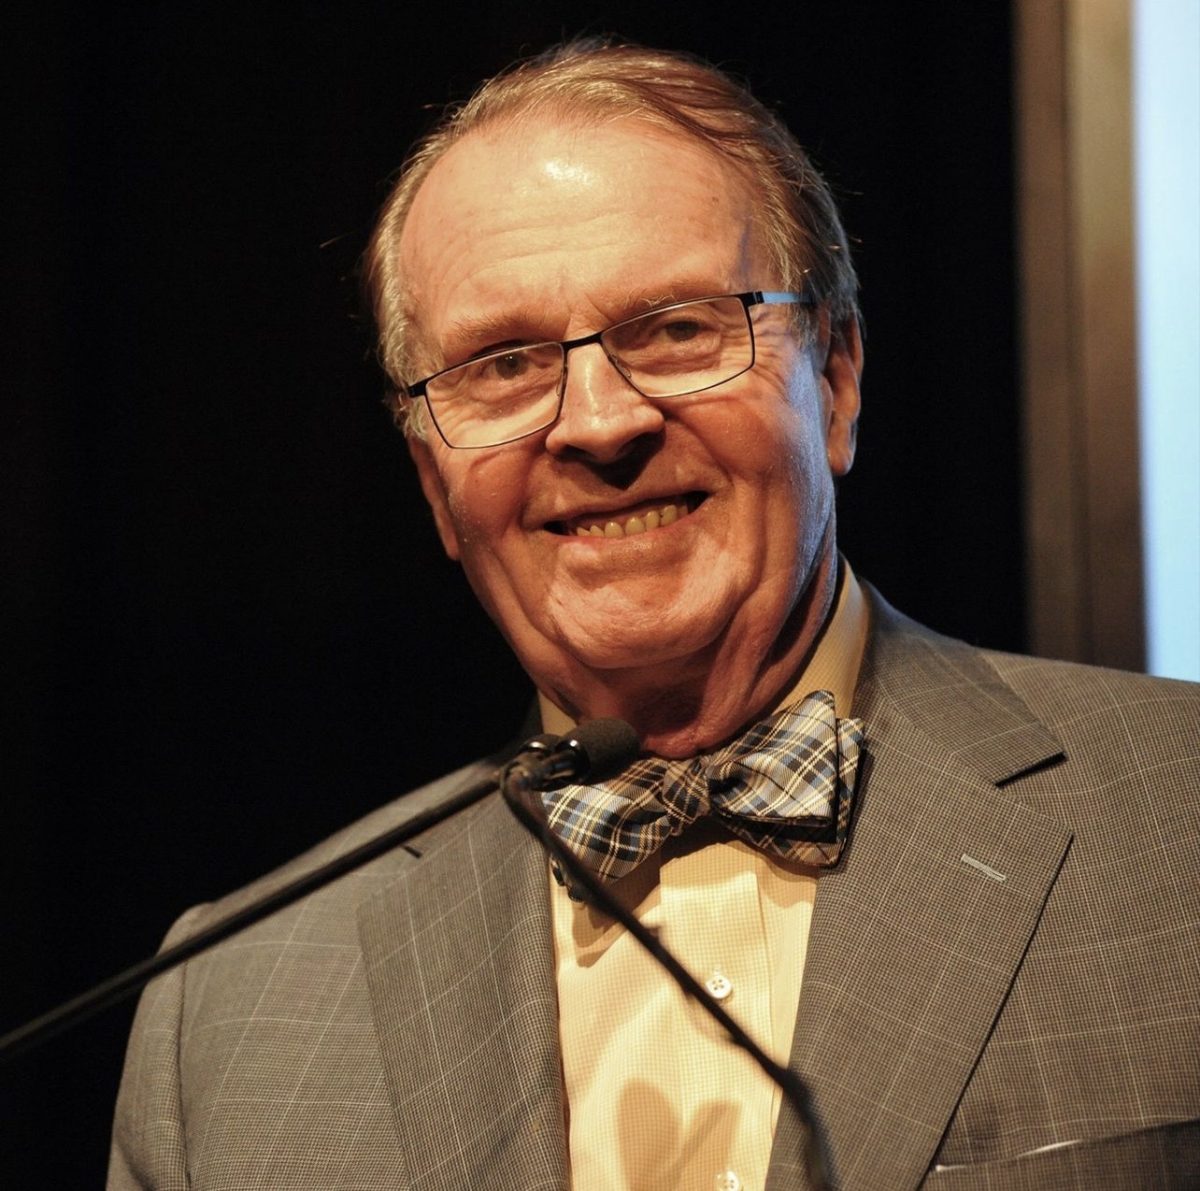 Broadcast journalist Charles Osgood passed away last Tuesday. (Courtesy of Instagram)